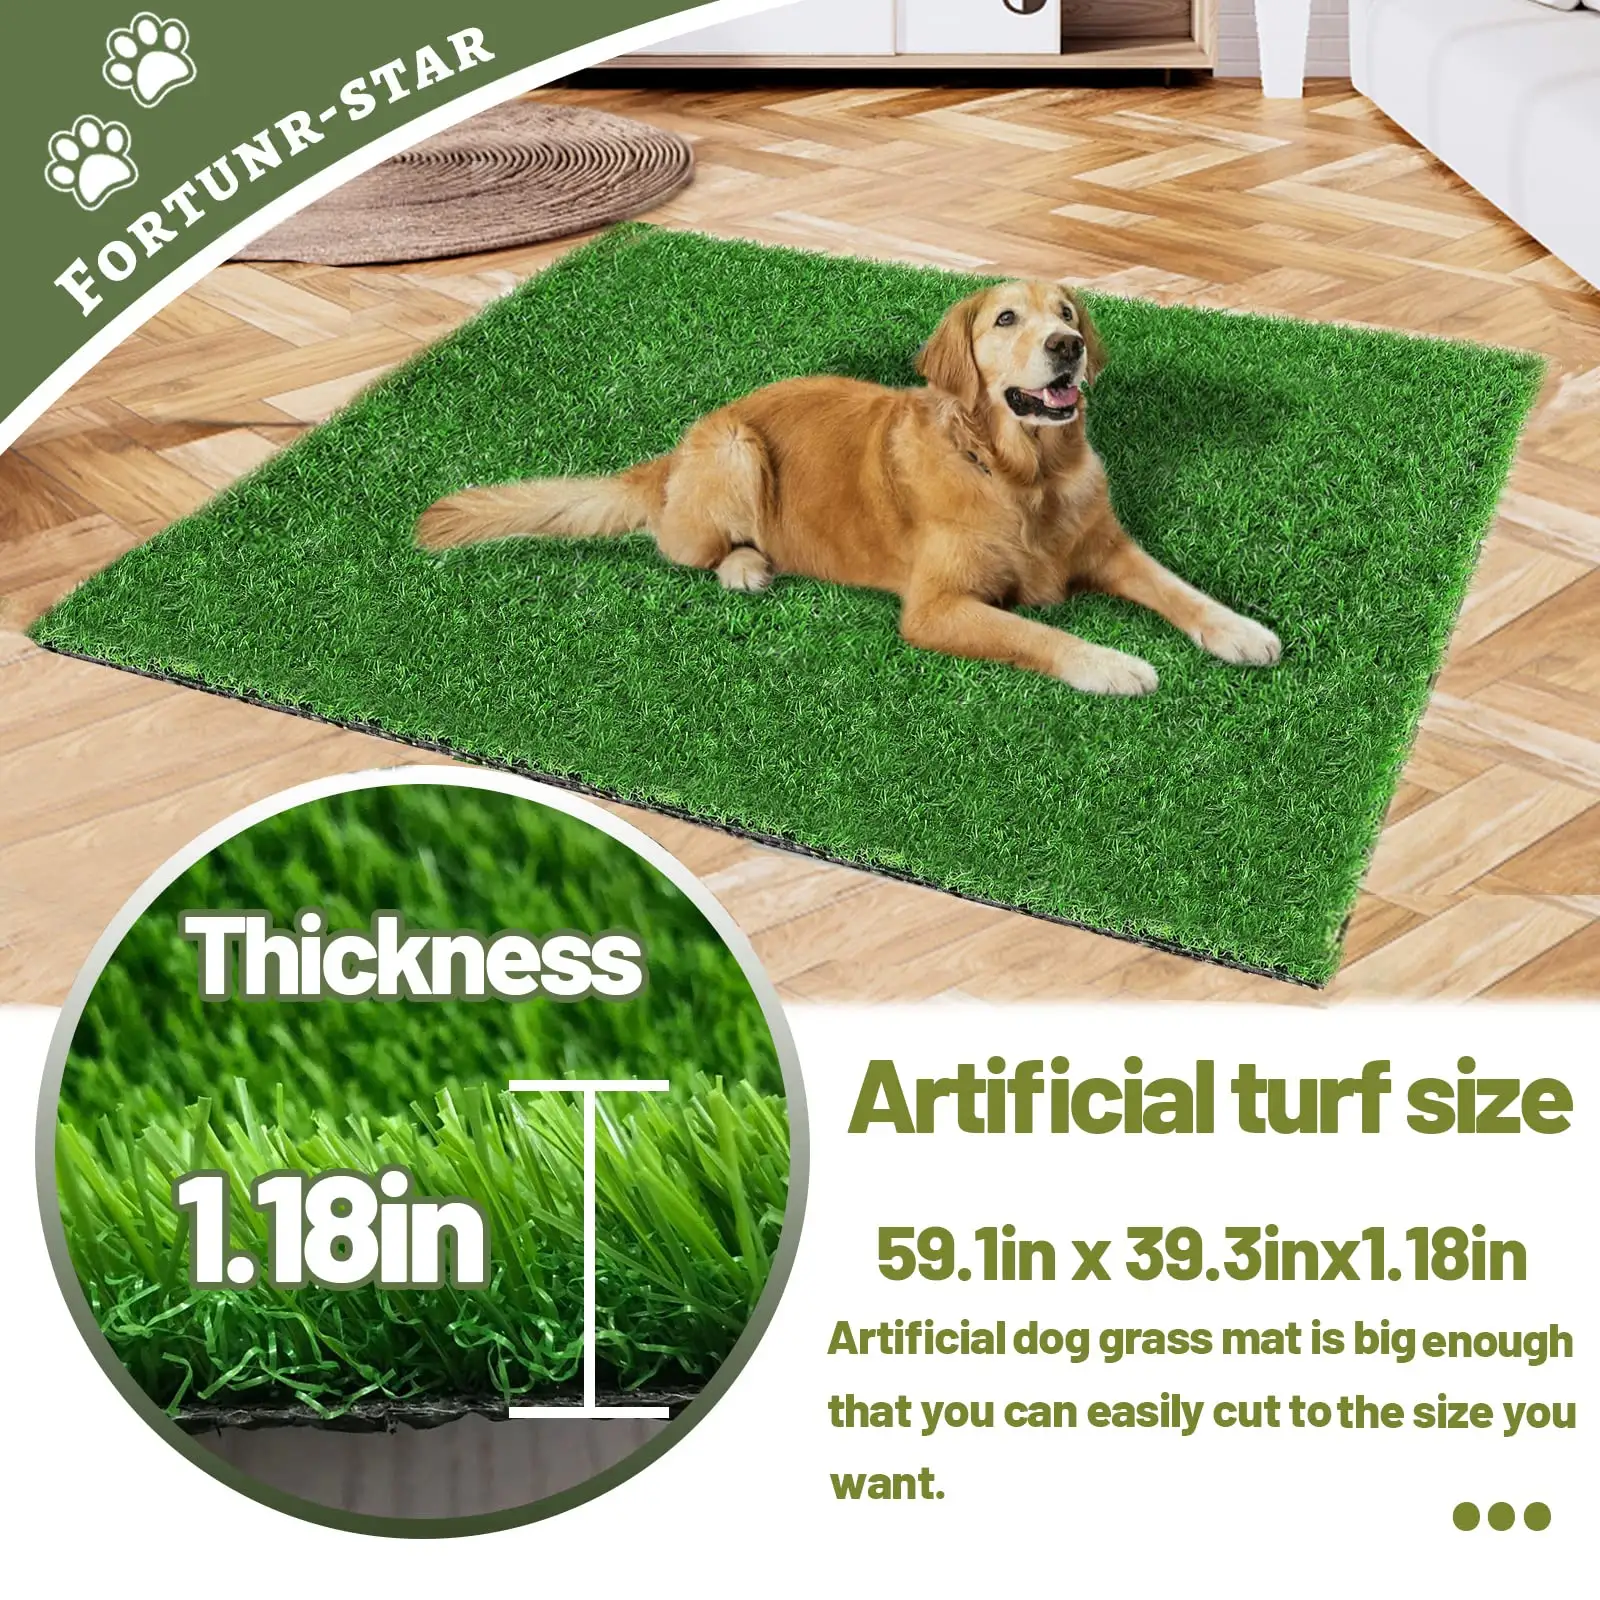 Turf Dog Potty for Indoor Outdoor Easy to Clean Reusable Artificial grass pad for dog Professional Potty Training